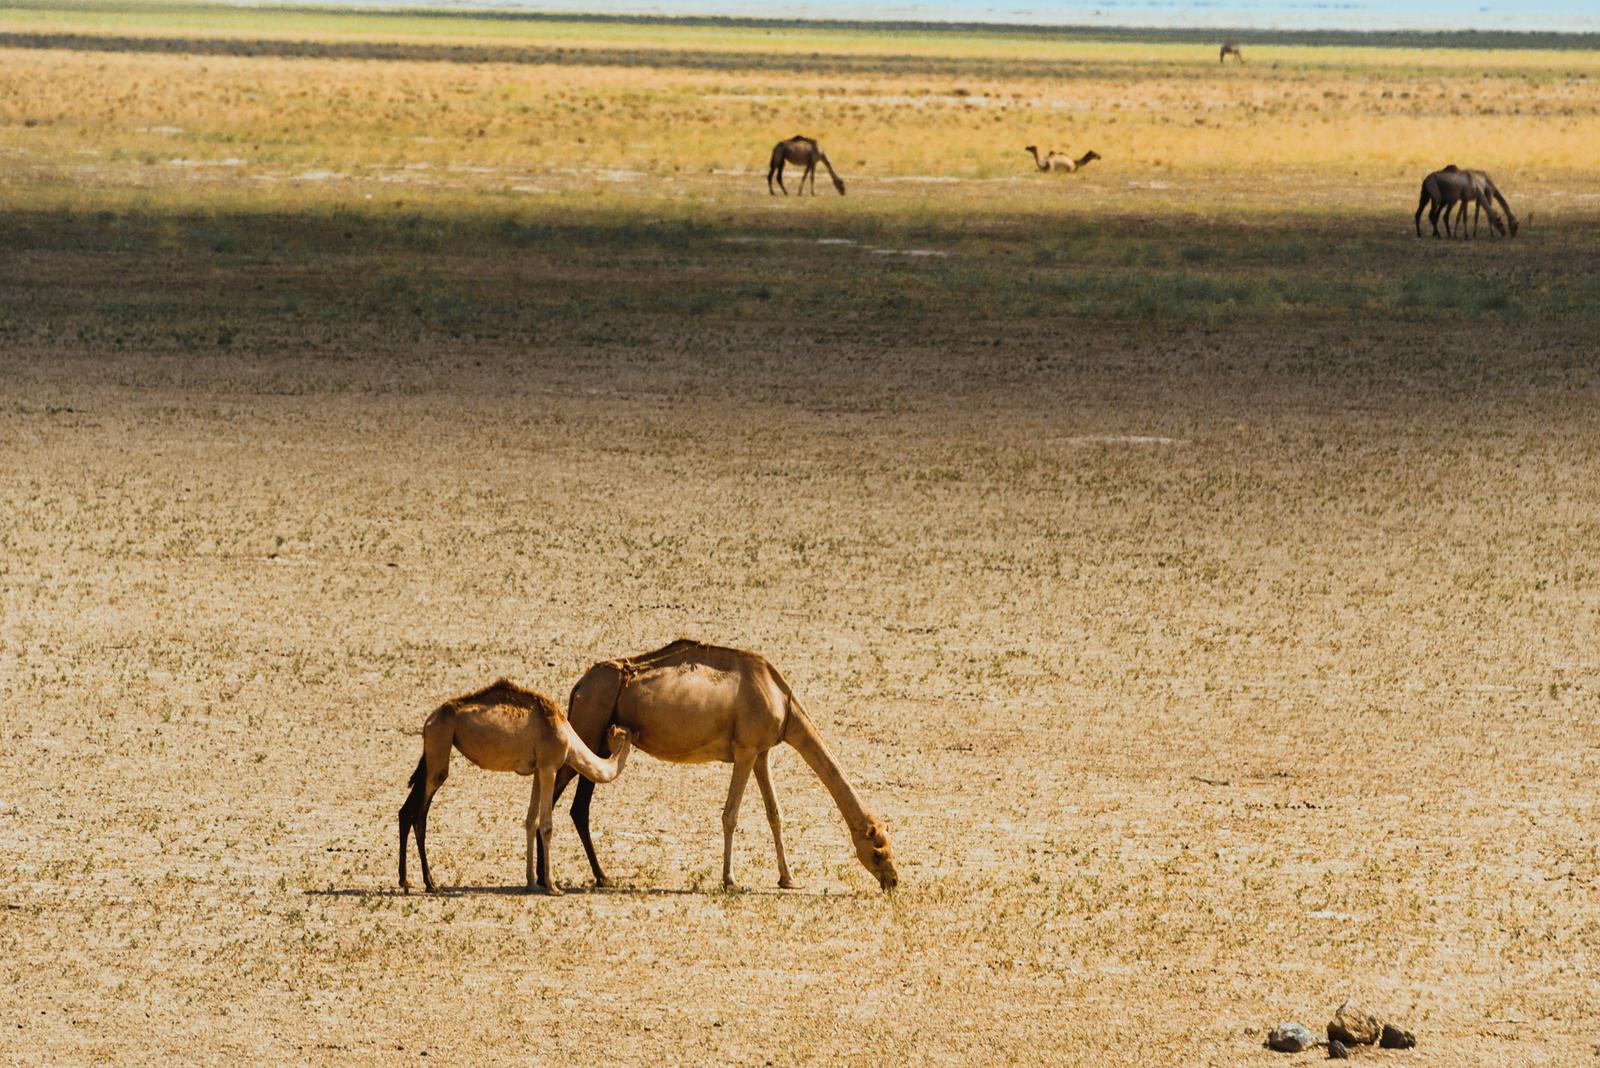 Camels in the Middle of Grassland